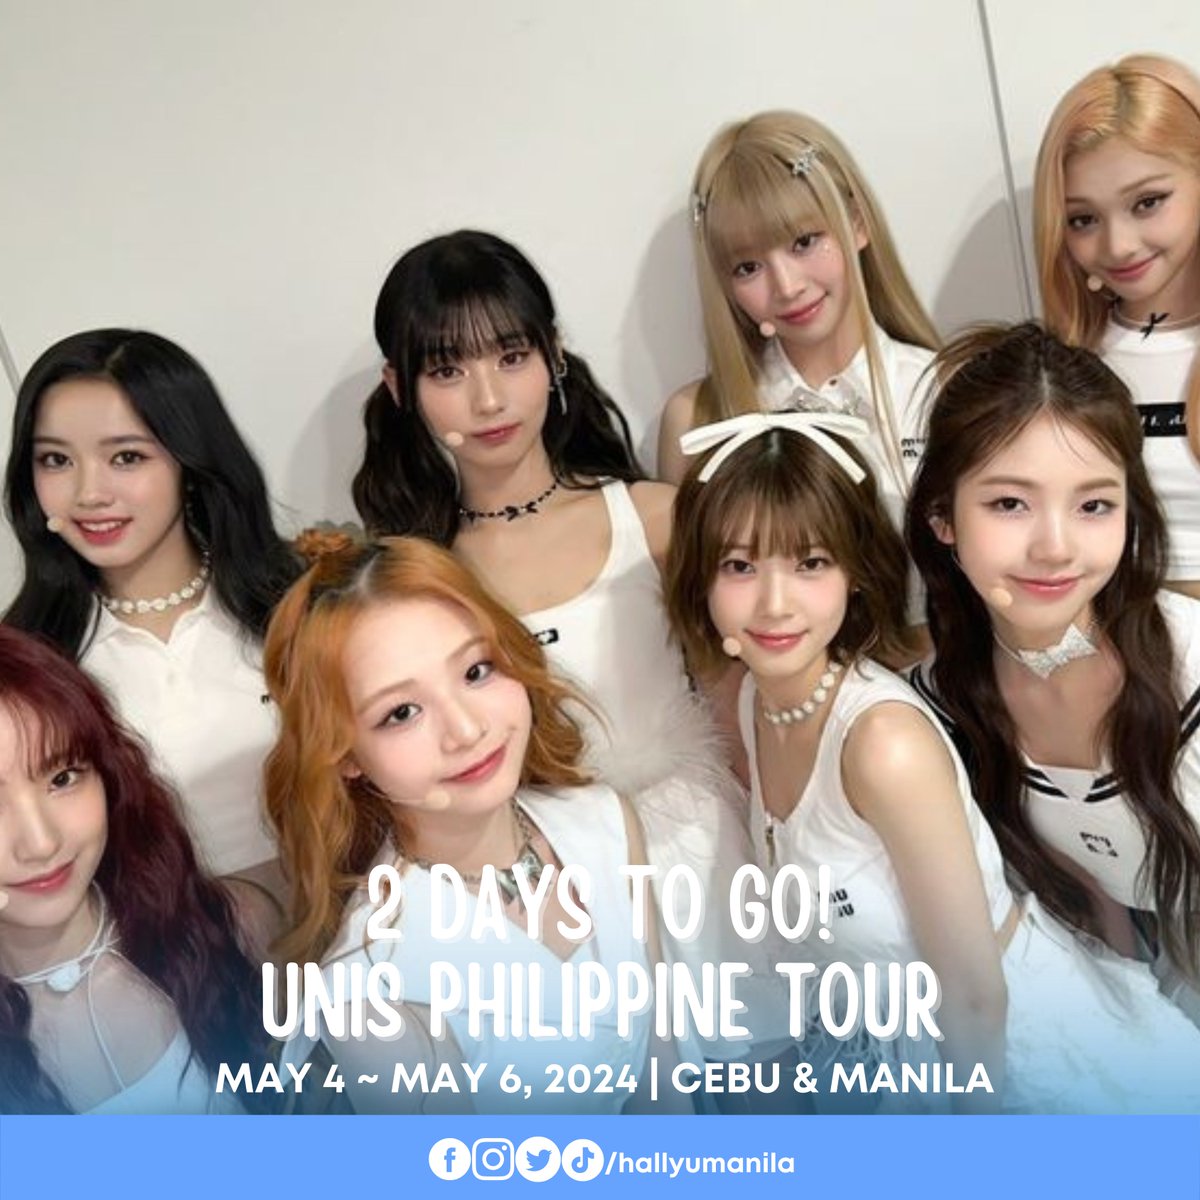 2 days until #UNISinCEBU 🩷

It's the first stop of #UNIS_Philippine_Tour so let's give them the warmest welcome!

Albums still available here: cdmentertainment.ph 

Presented by @cdmentph and @rafaella_films
#UNIS_Philippine_Tour
#UNISinCEBU
#UNISinMANILA
#UNISinMANILA_Day2